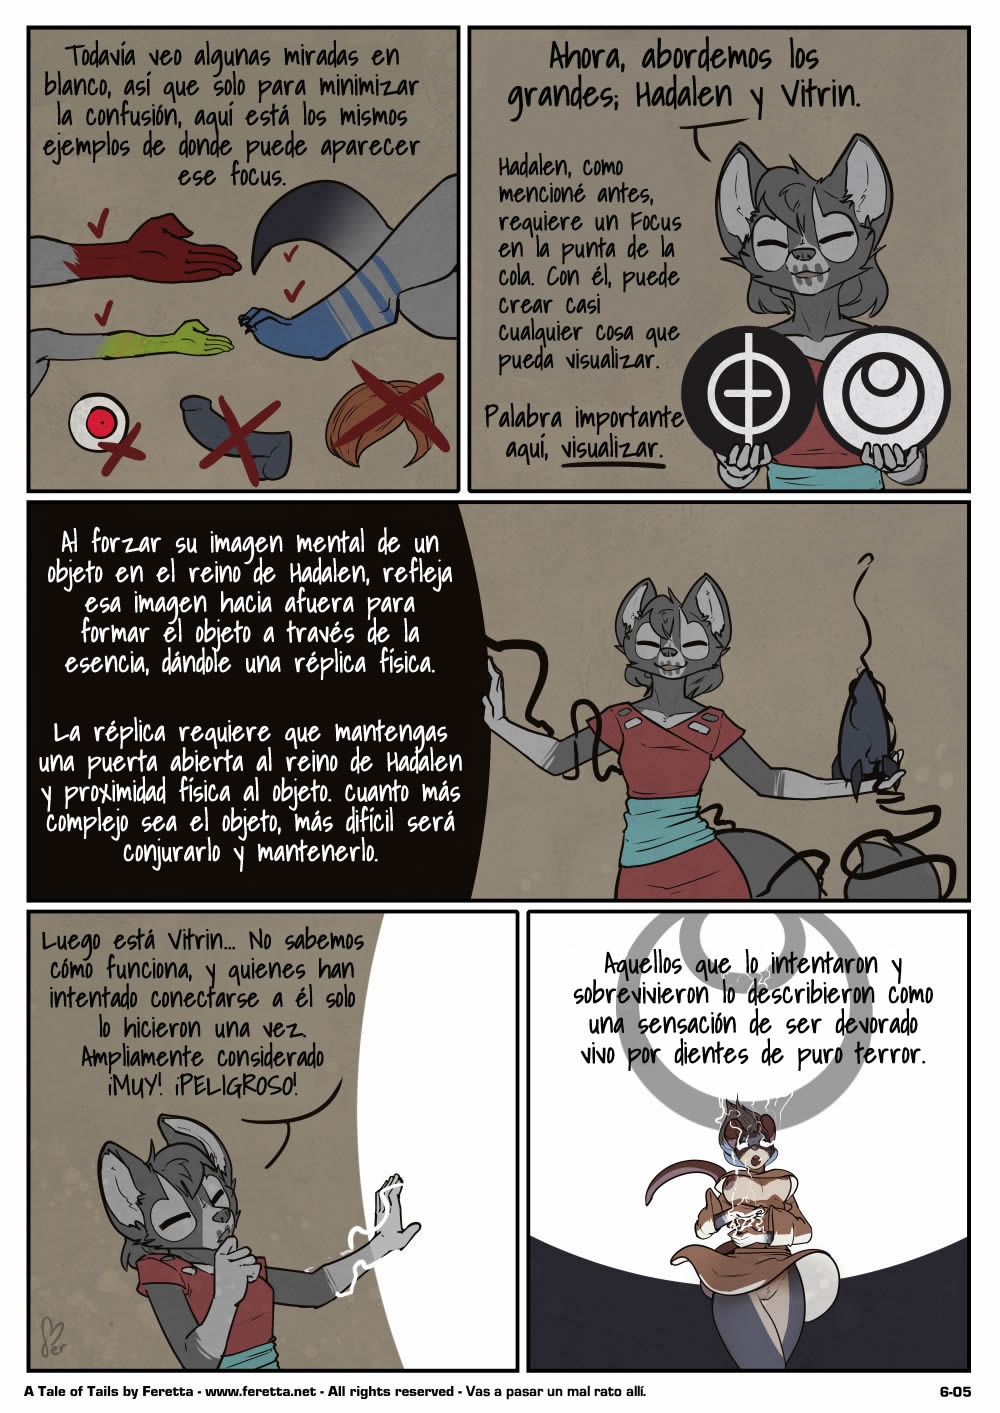 [Feretta] A Tale of Tails: Chapter 6 - Paths converge / Los caminos convergen [Spanish] [Red Fox Makkan] 5